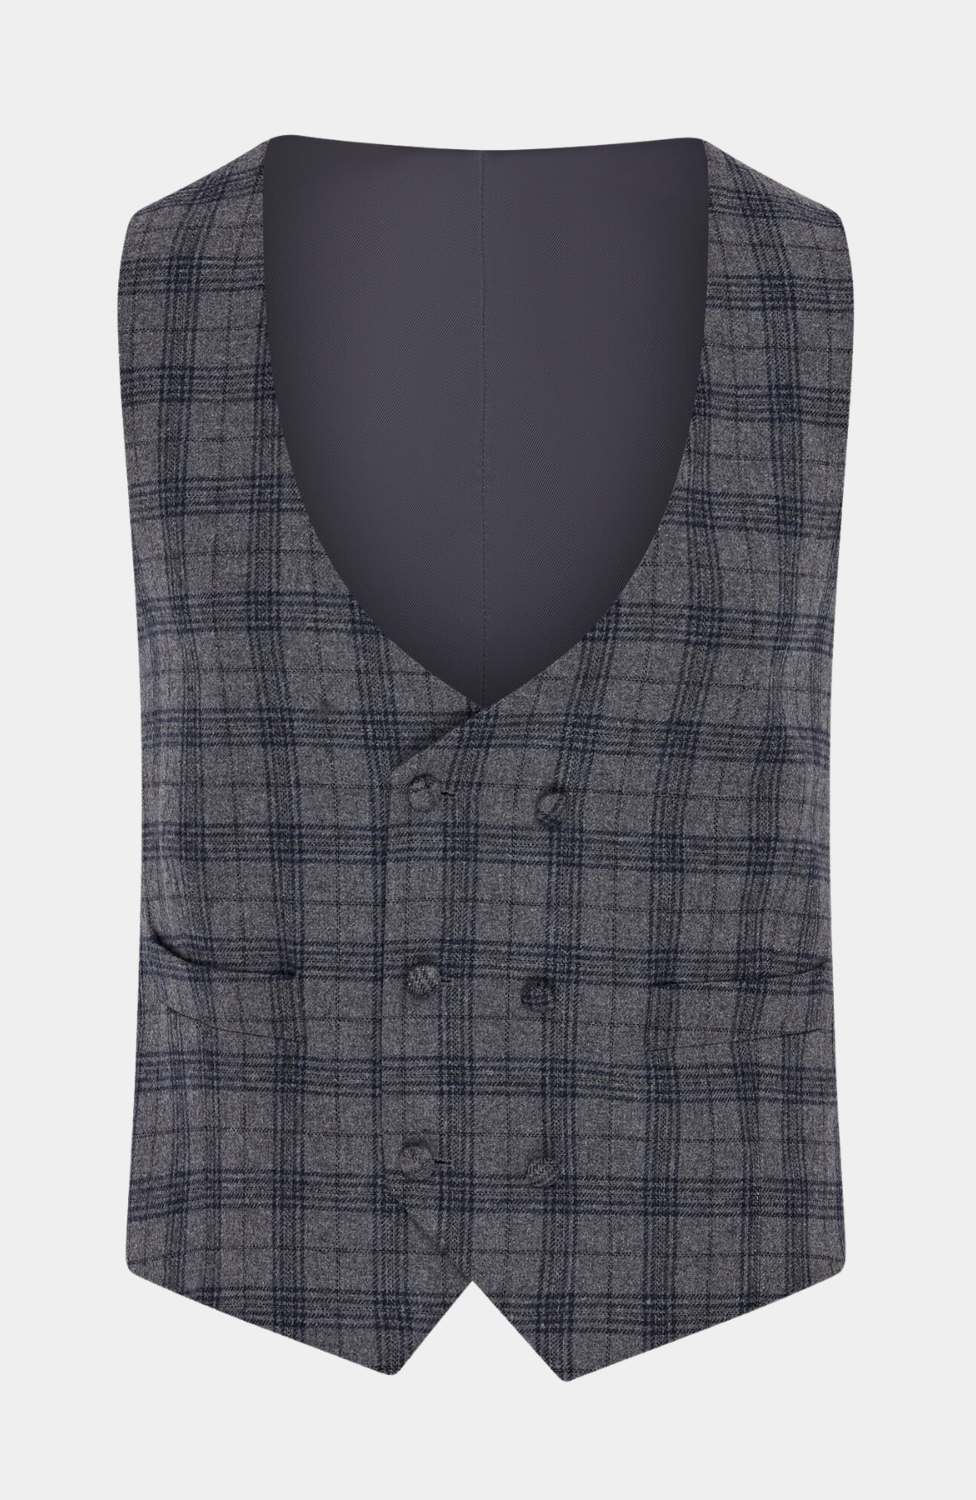 MAIDENS DOUBLE BREASTED WAISTCOAT - HIRE: £25.00